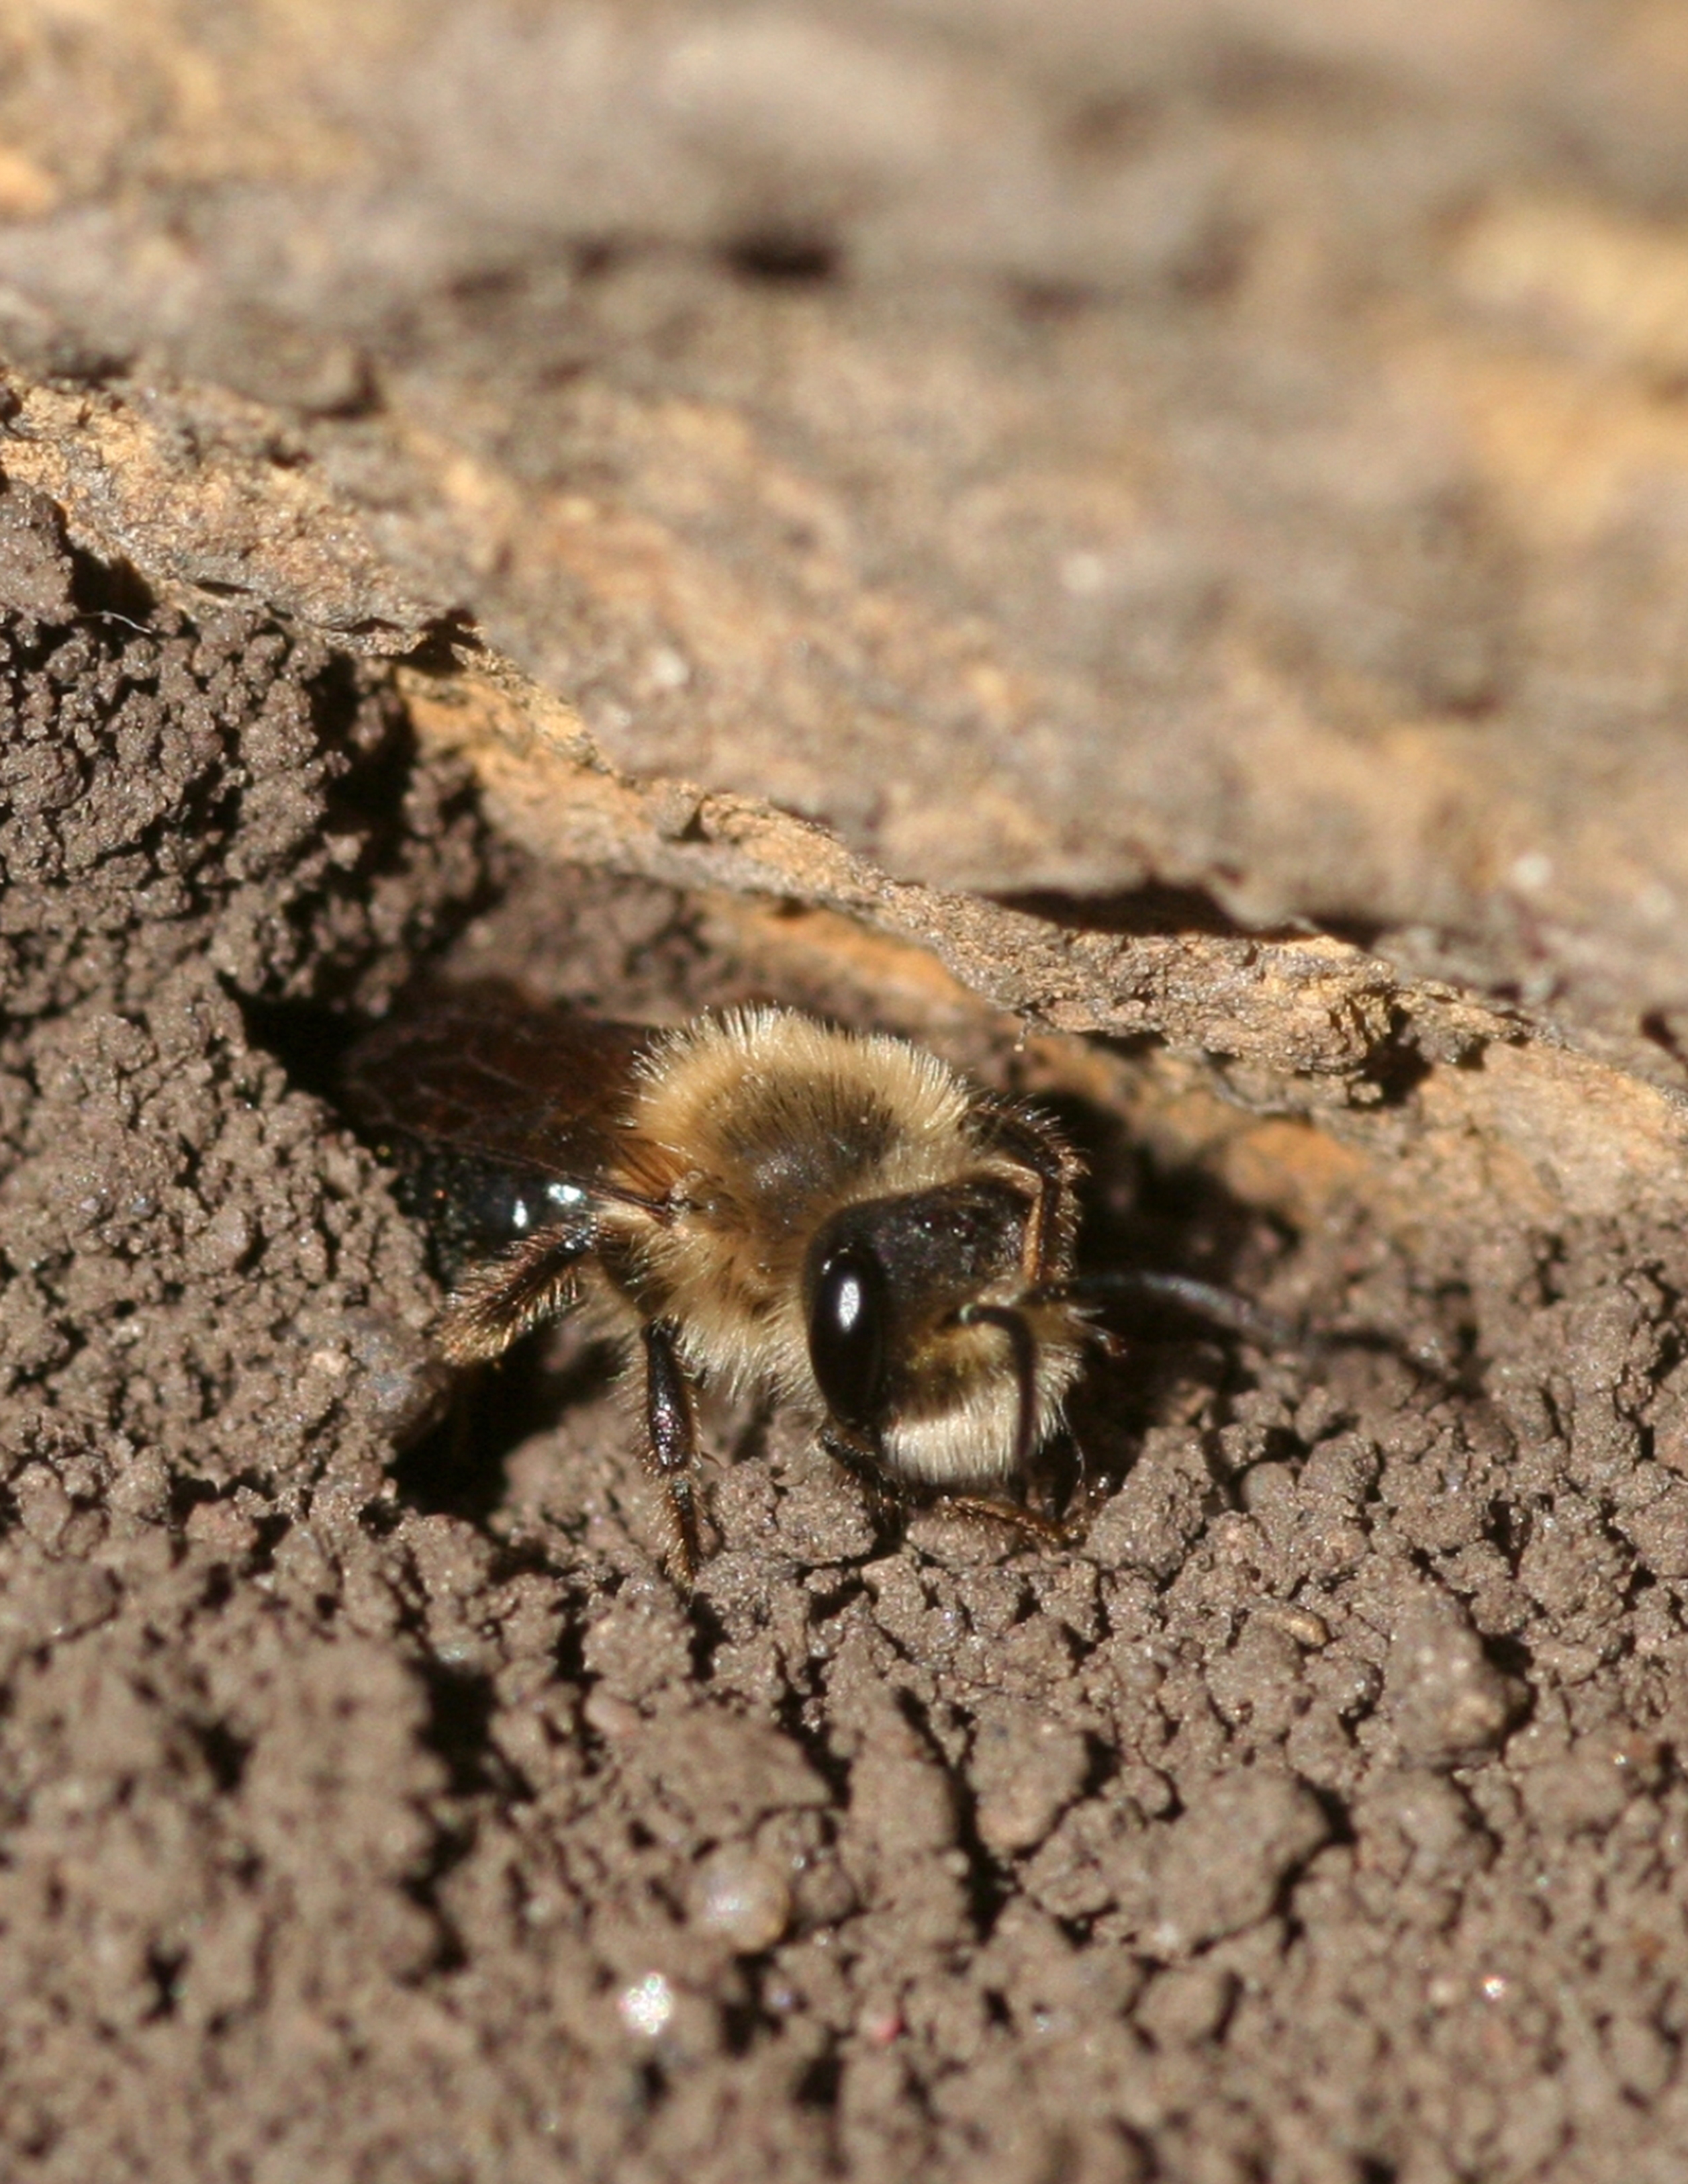 A fuzzy bee with big, shiny eyes peers out of a hole in bare dirt.